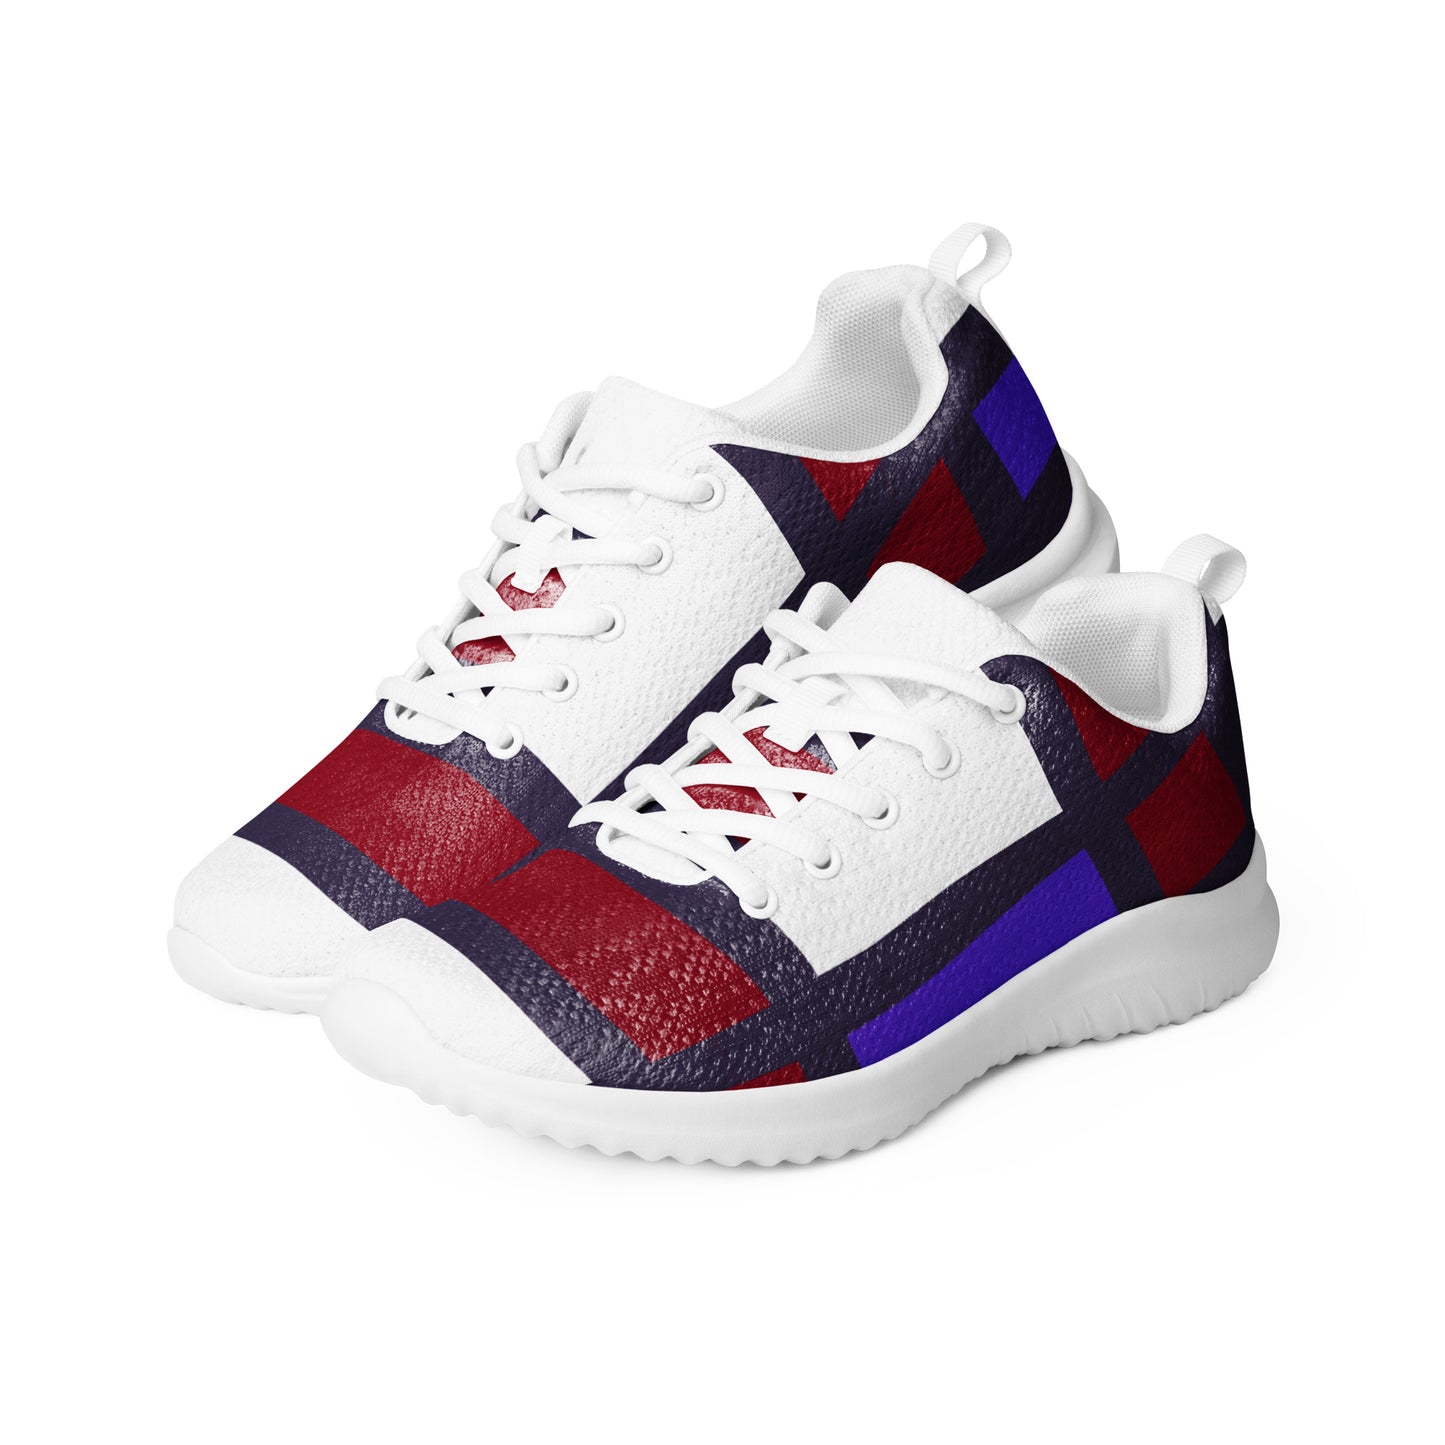 Women’s athletic shoes - WS 101 Stained Glass